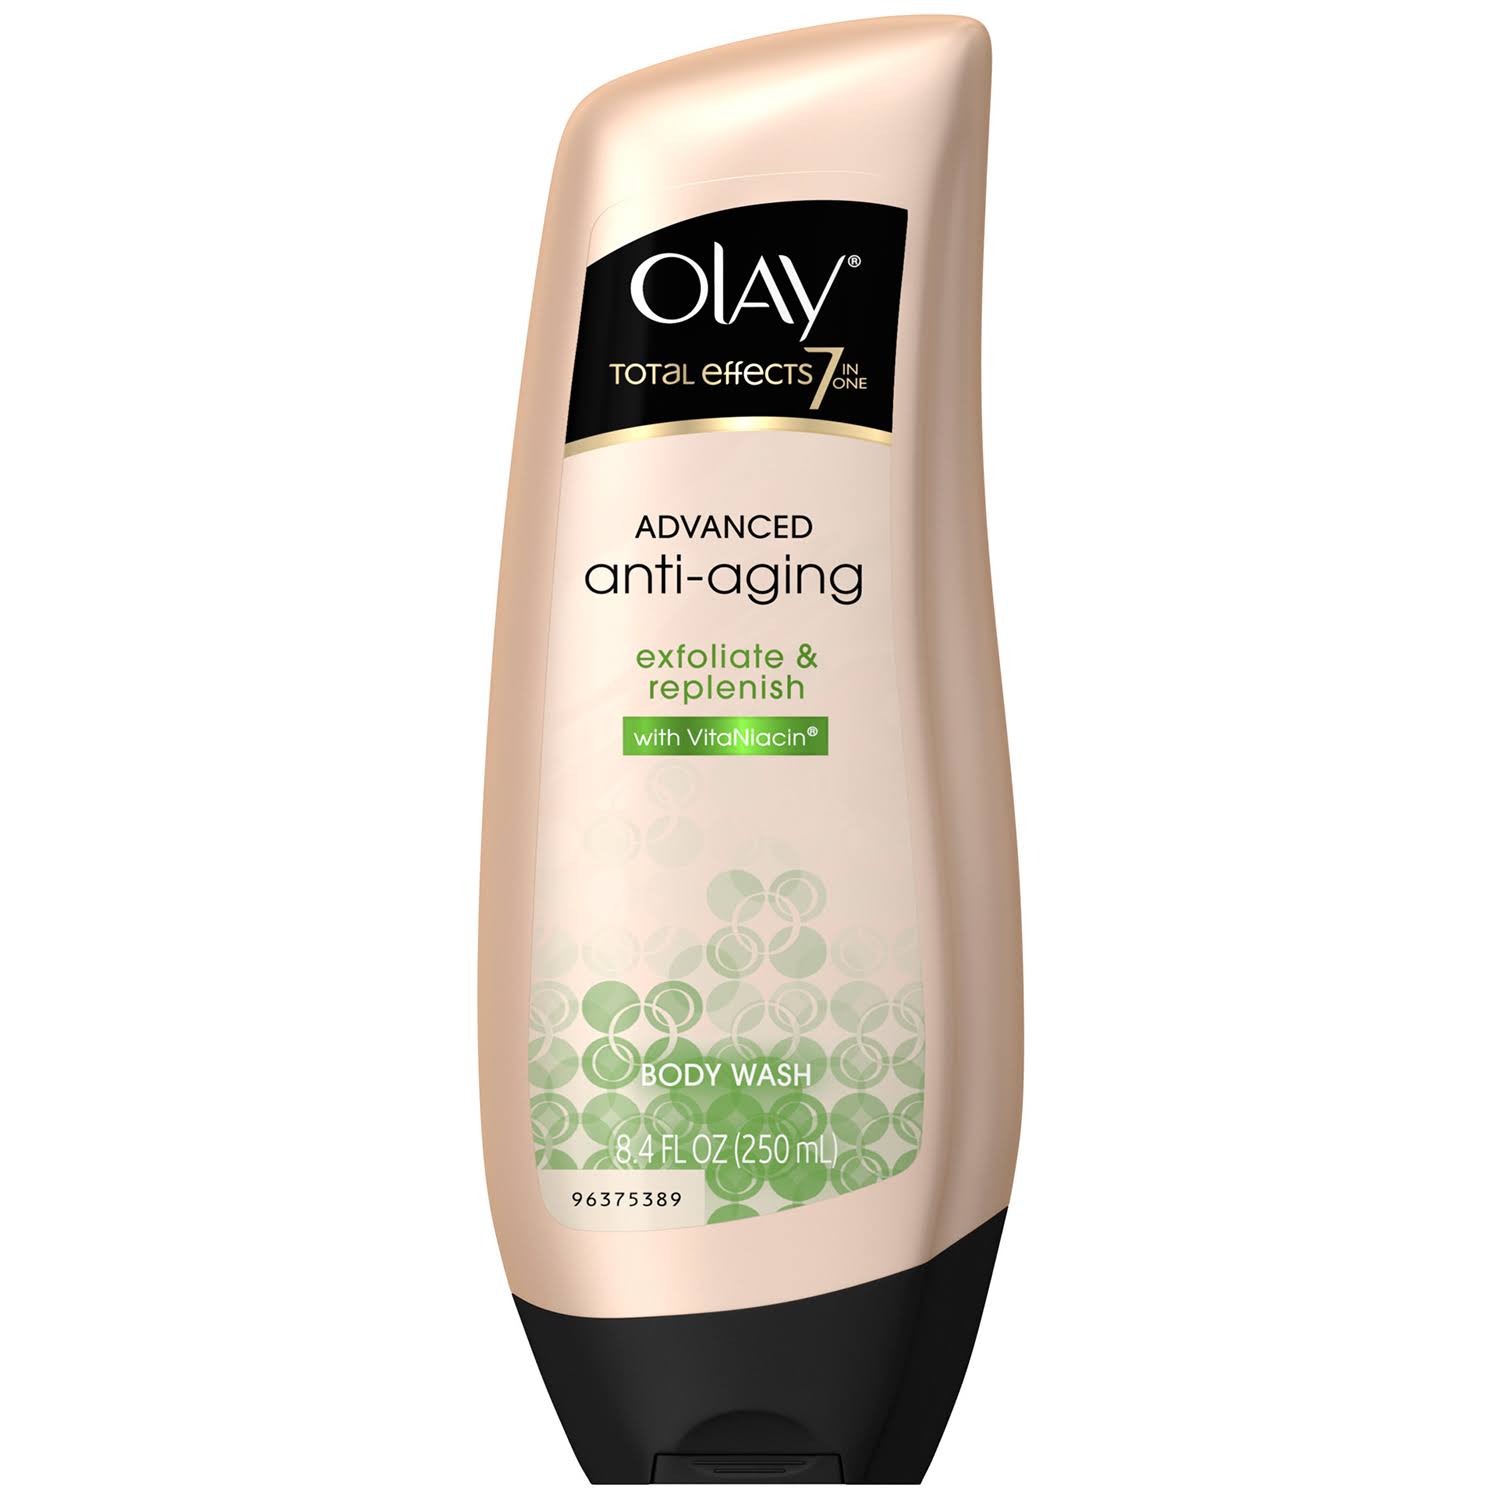 Olay Total Effects Advanced Anti-aging Exfoliate and Replenish Body Wash